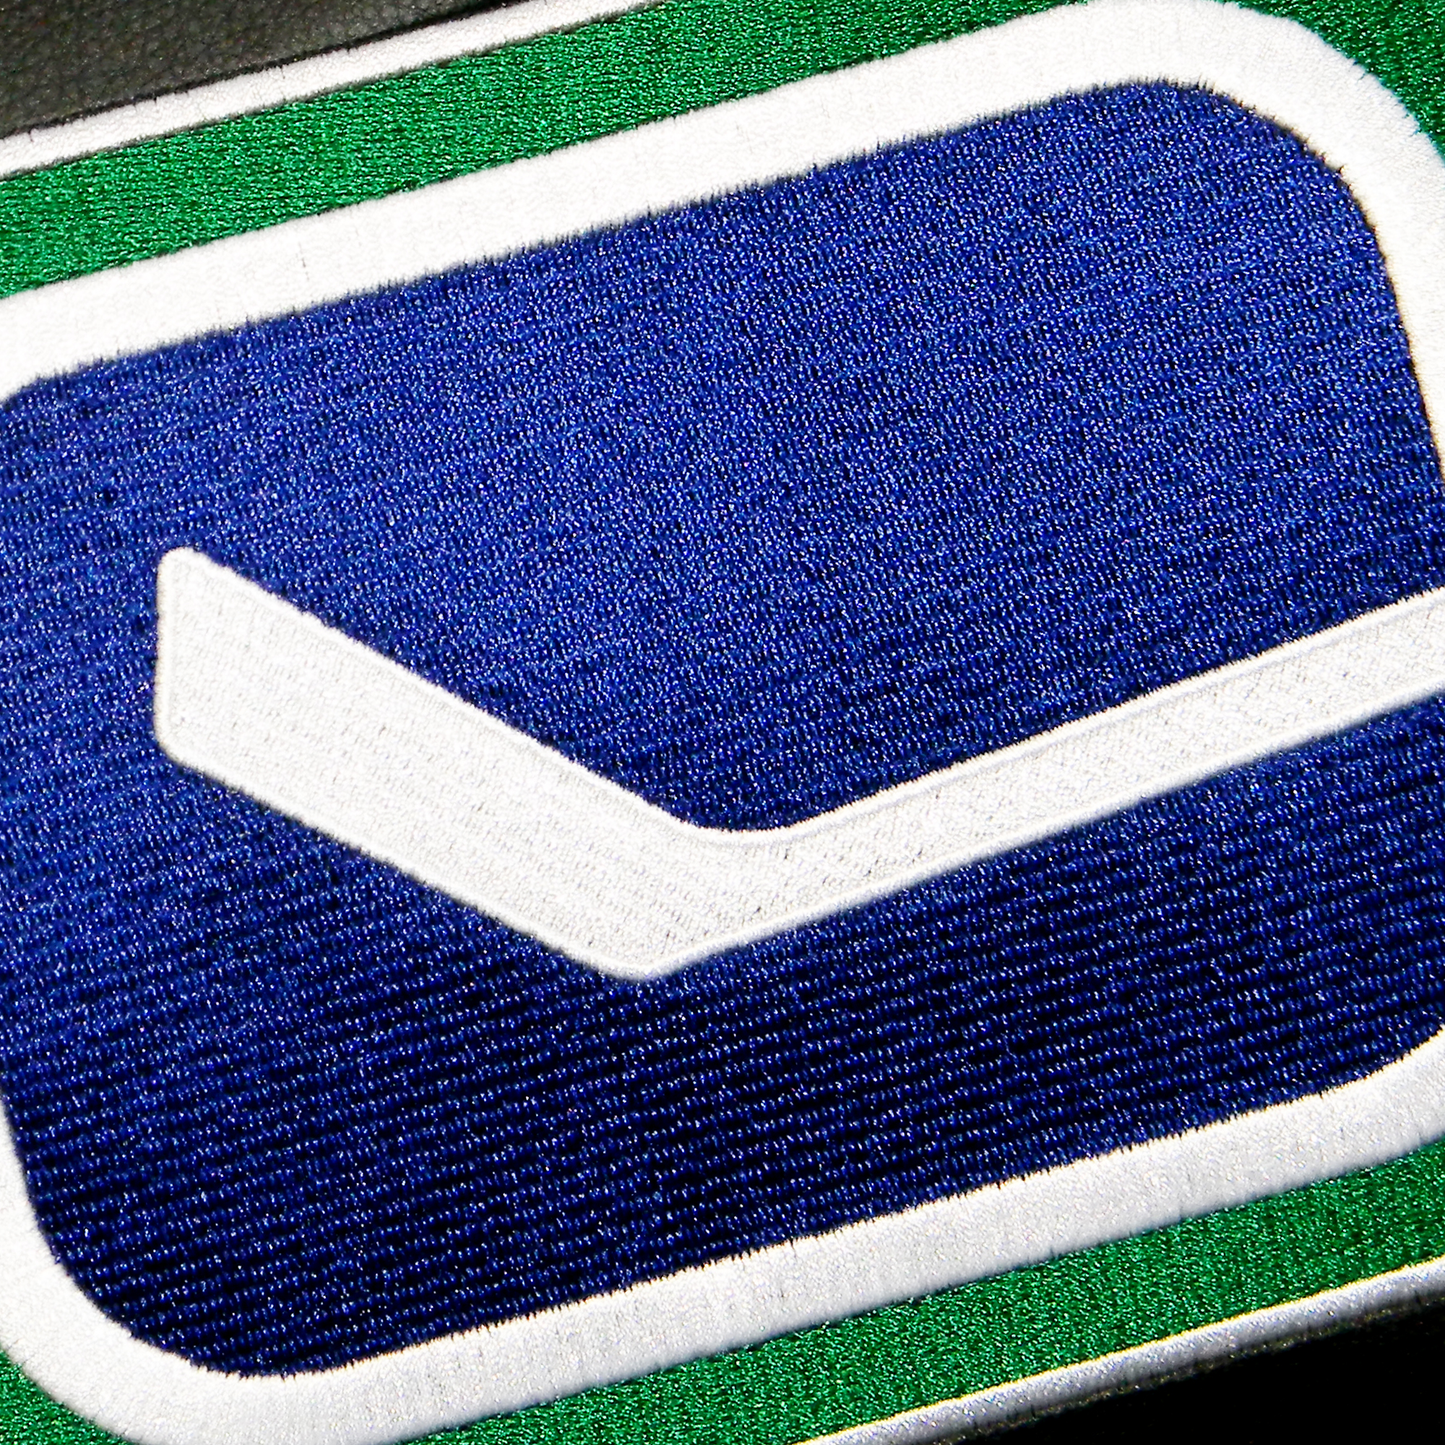 Curve Task Chair with Vancouver Canucks Secondary Logo